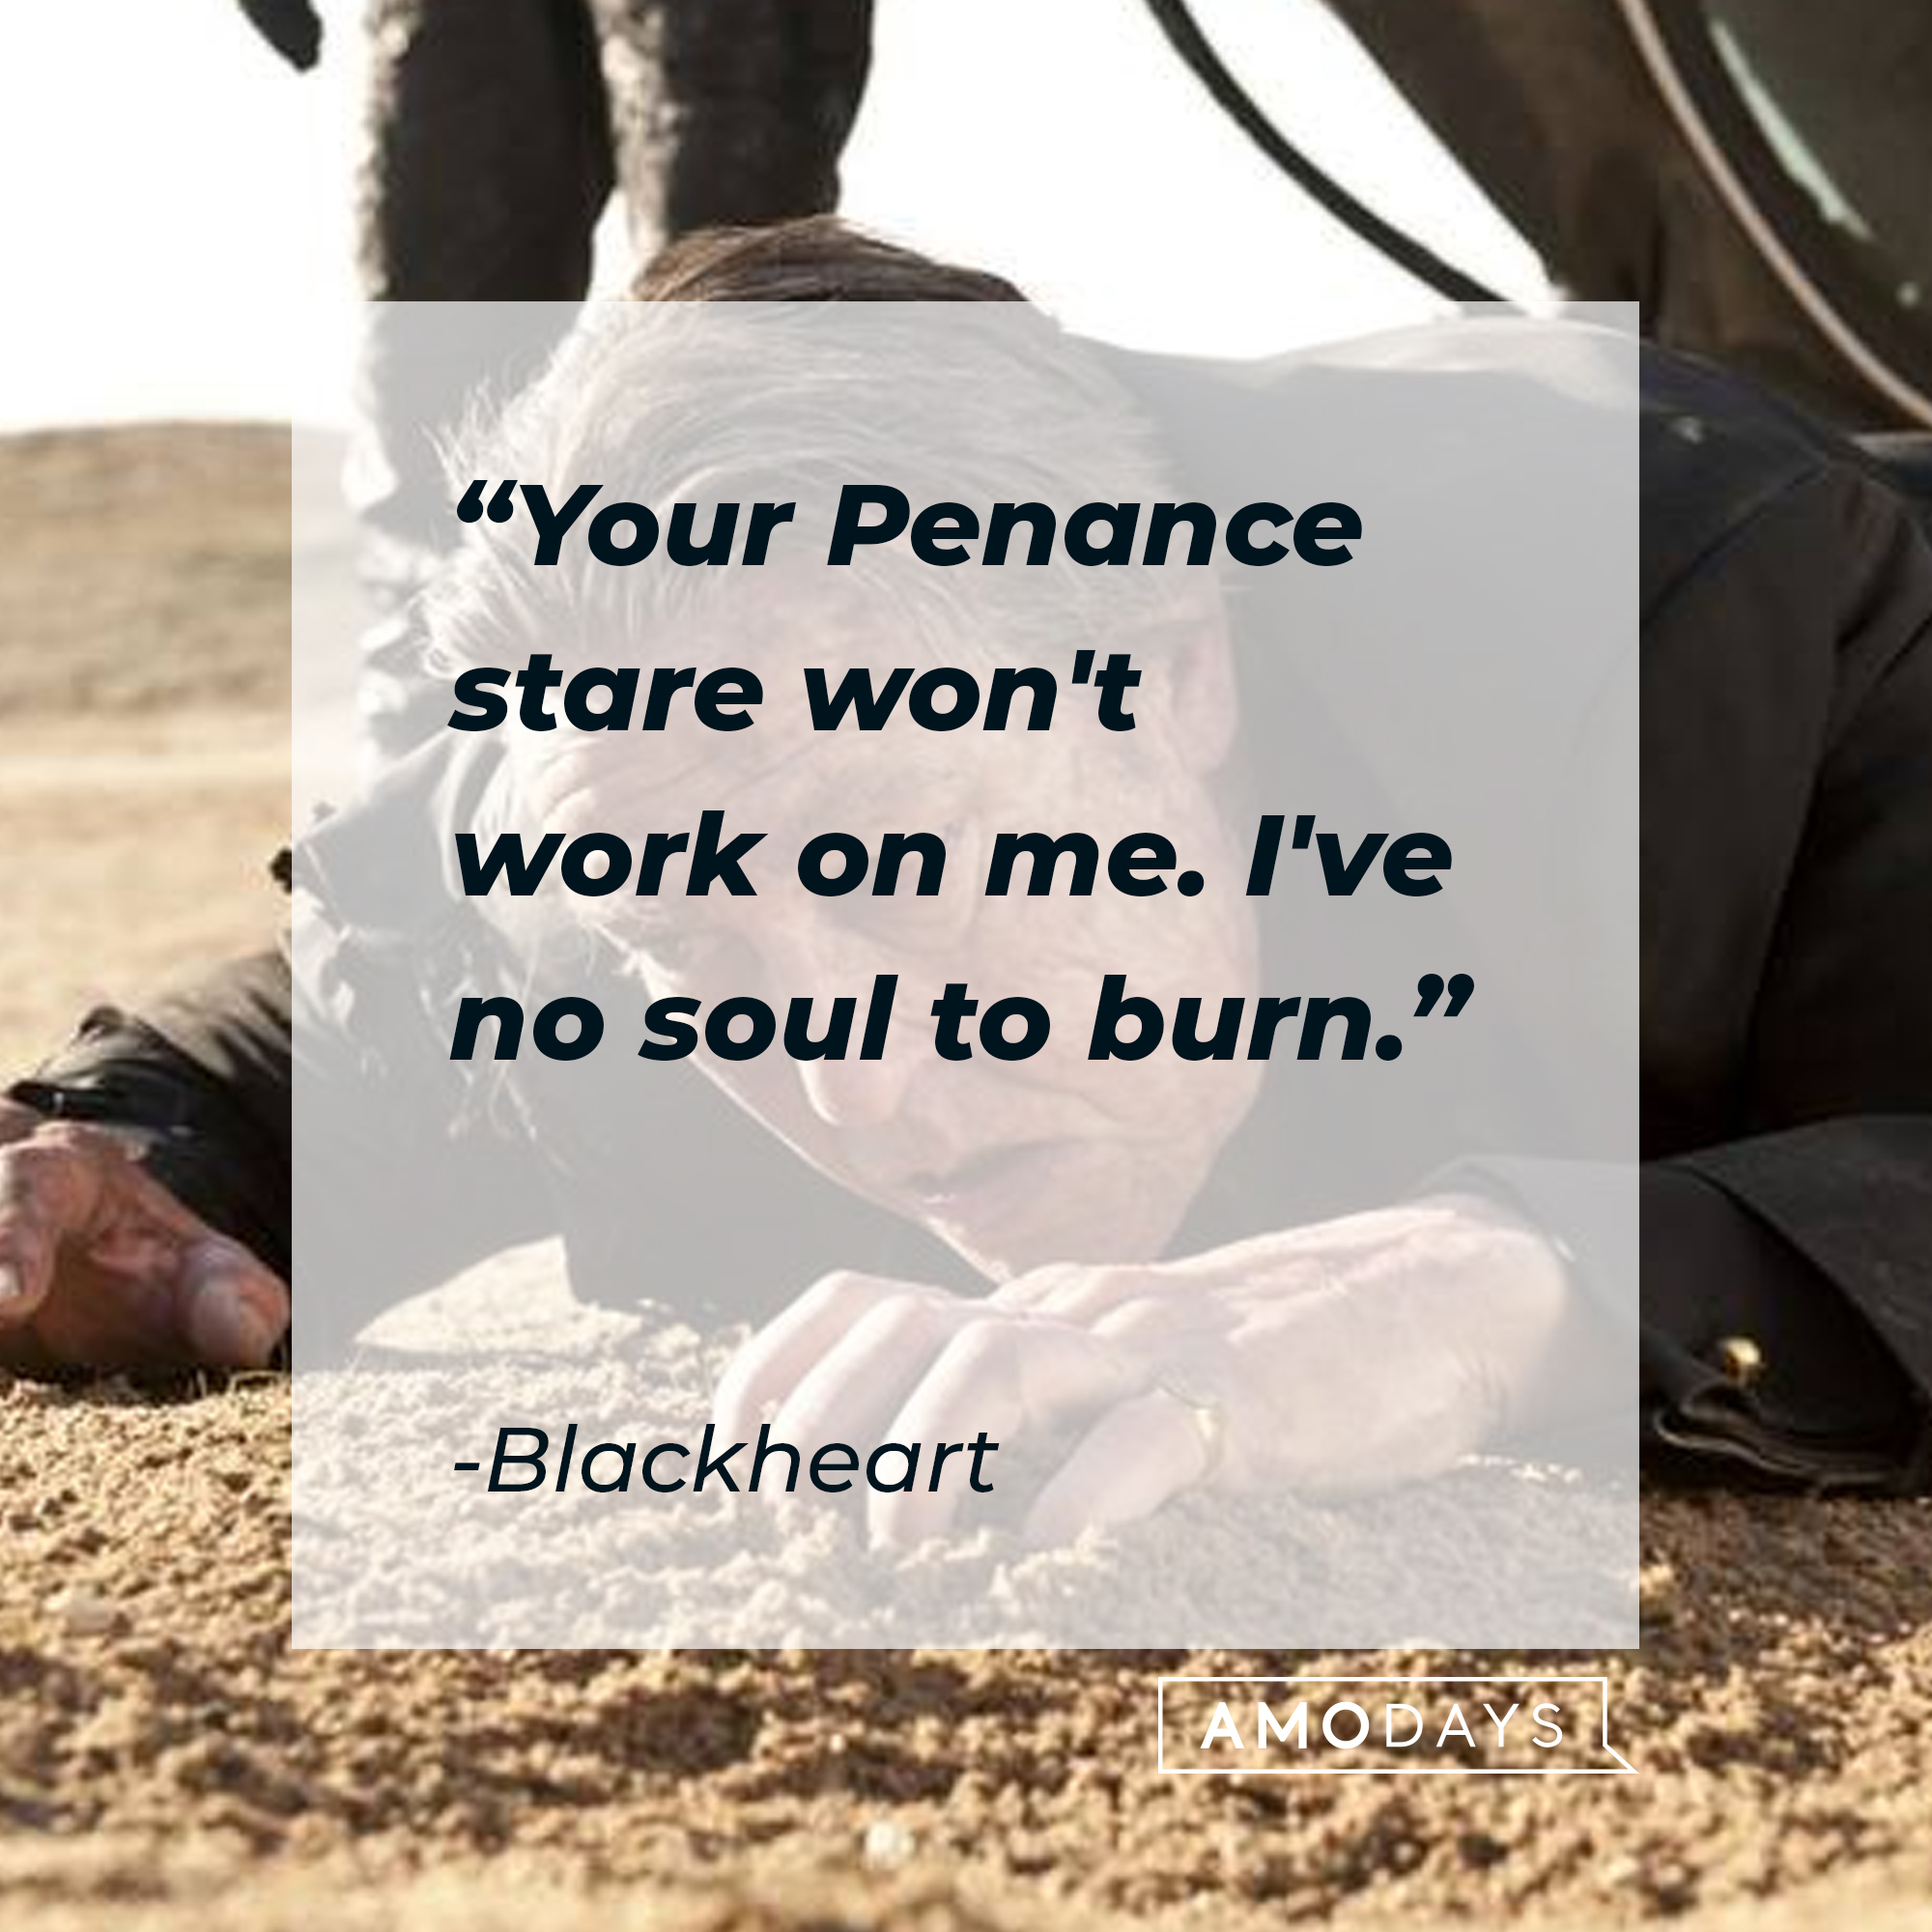 Blackheart's quote: "Your Penance stare won't work on me. I've no soul to burn." | Source: facebook.com/ghostridermovie